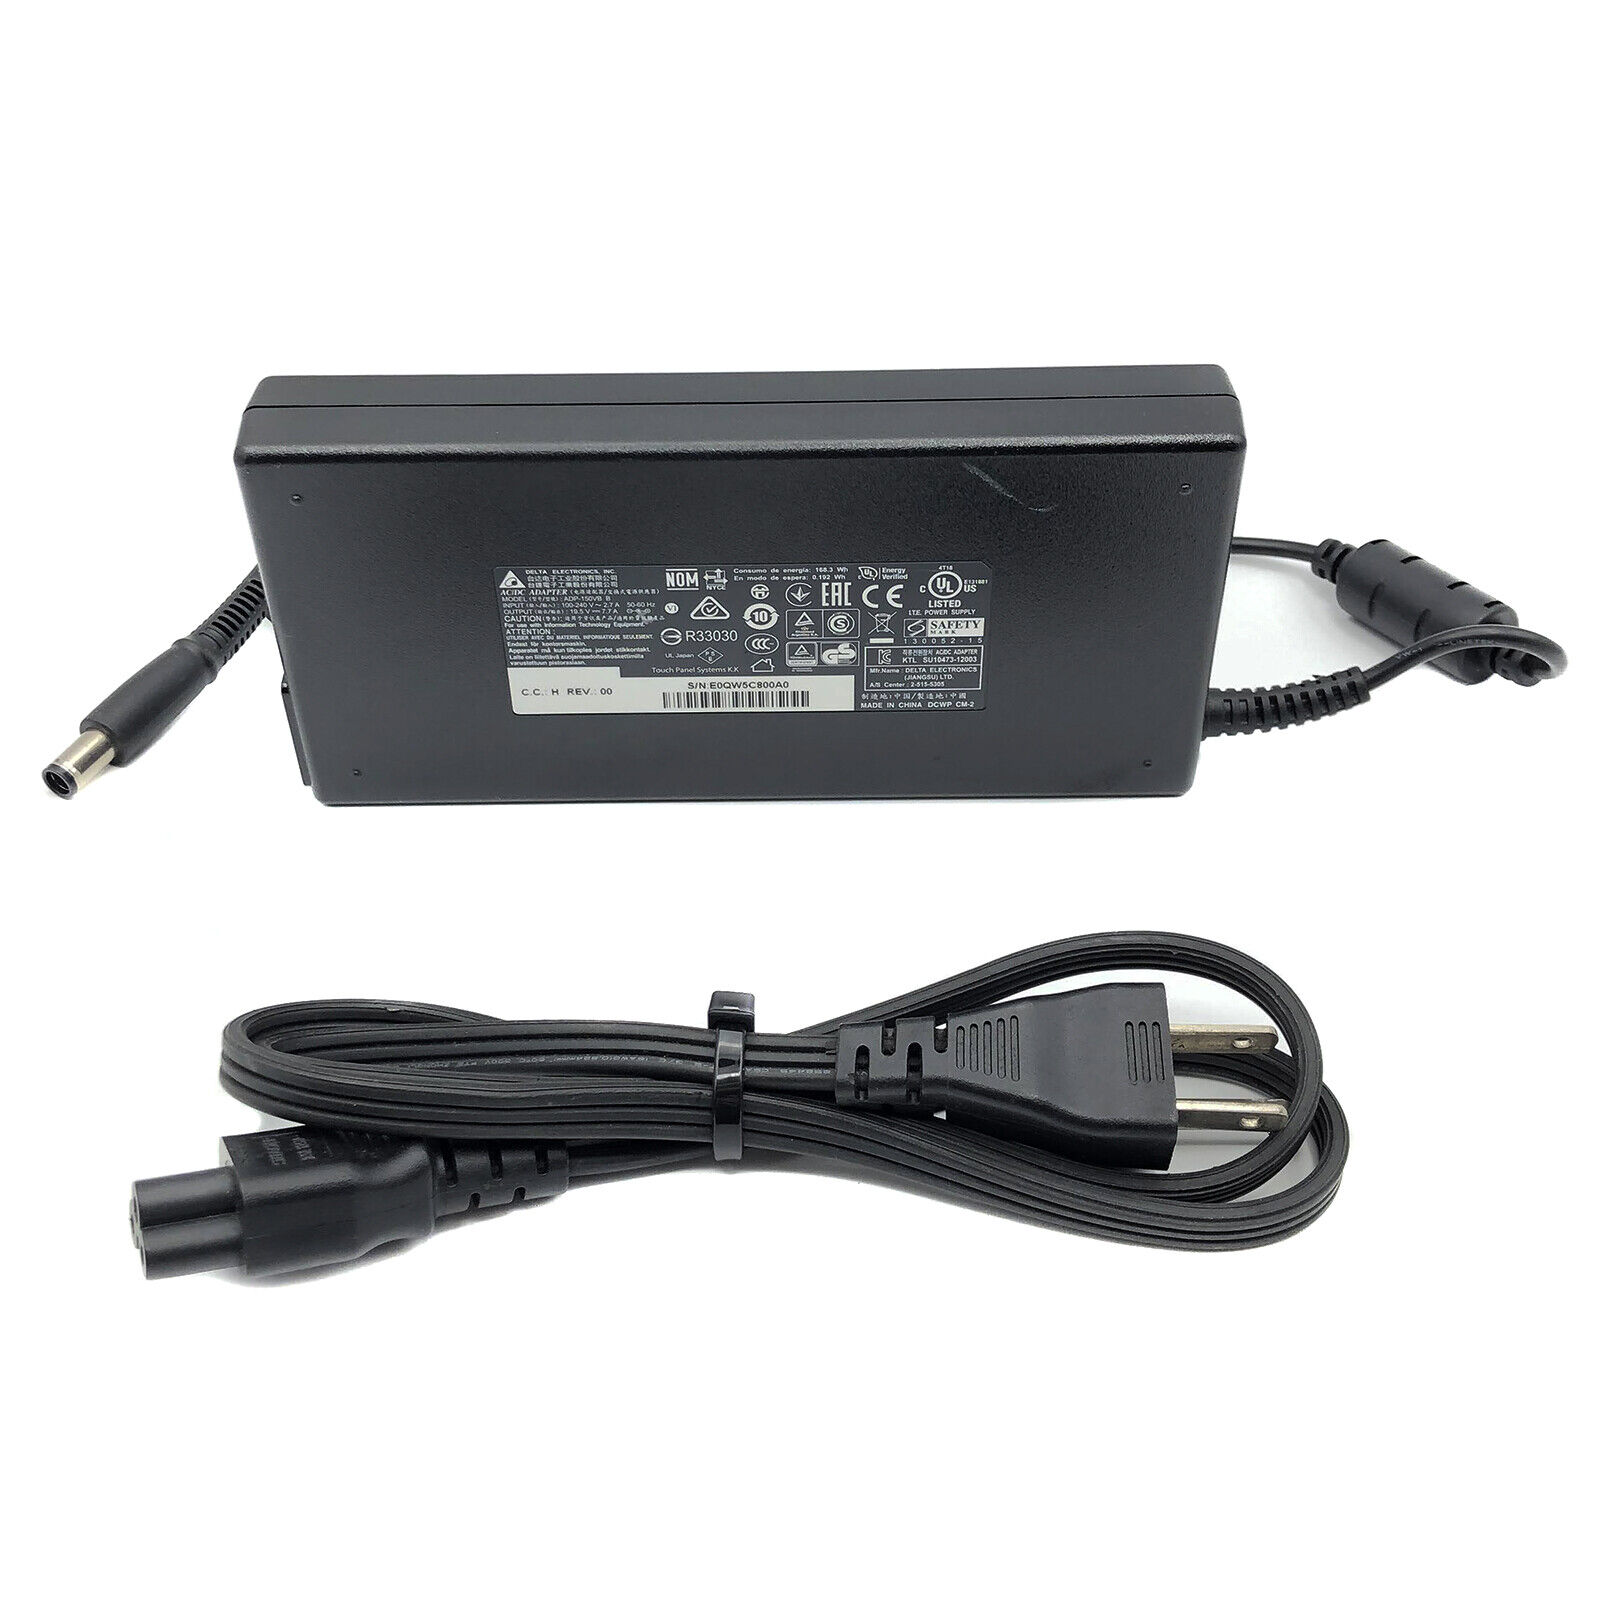 Genuine Delta Laptop Charger AC Adapter A14-150P1A A150A014L 150W 7.4mm No Pin